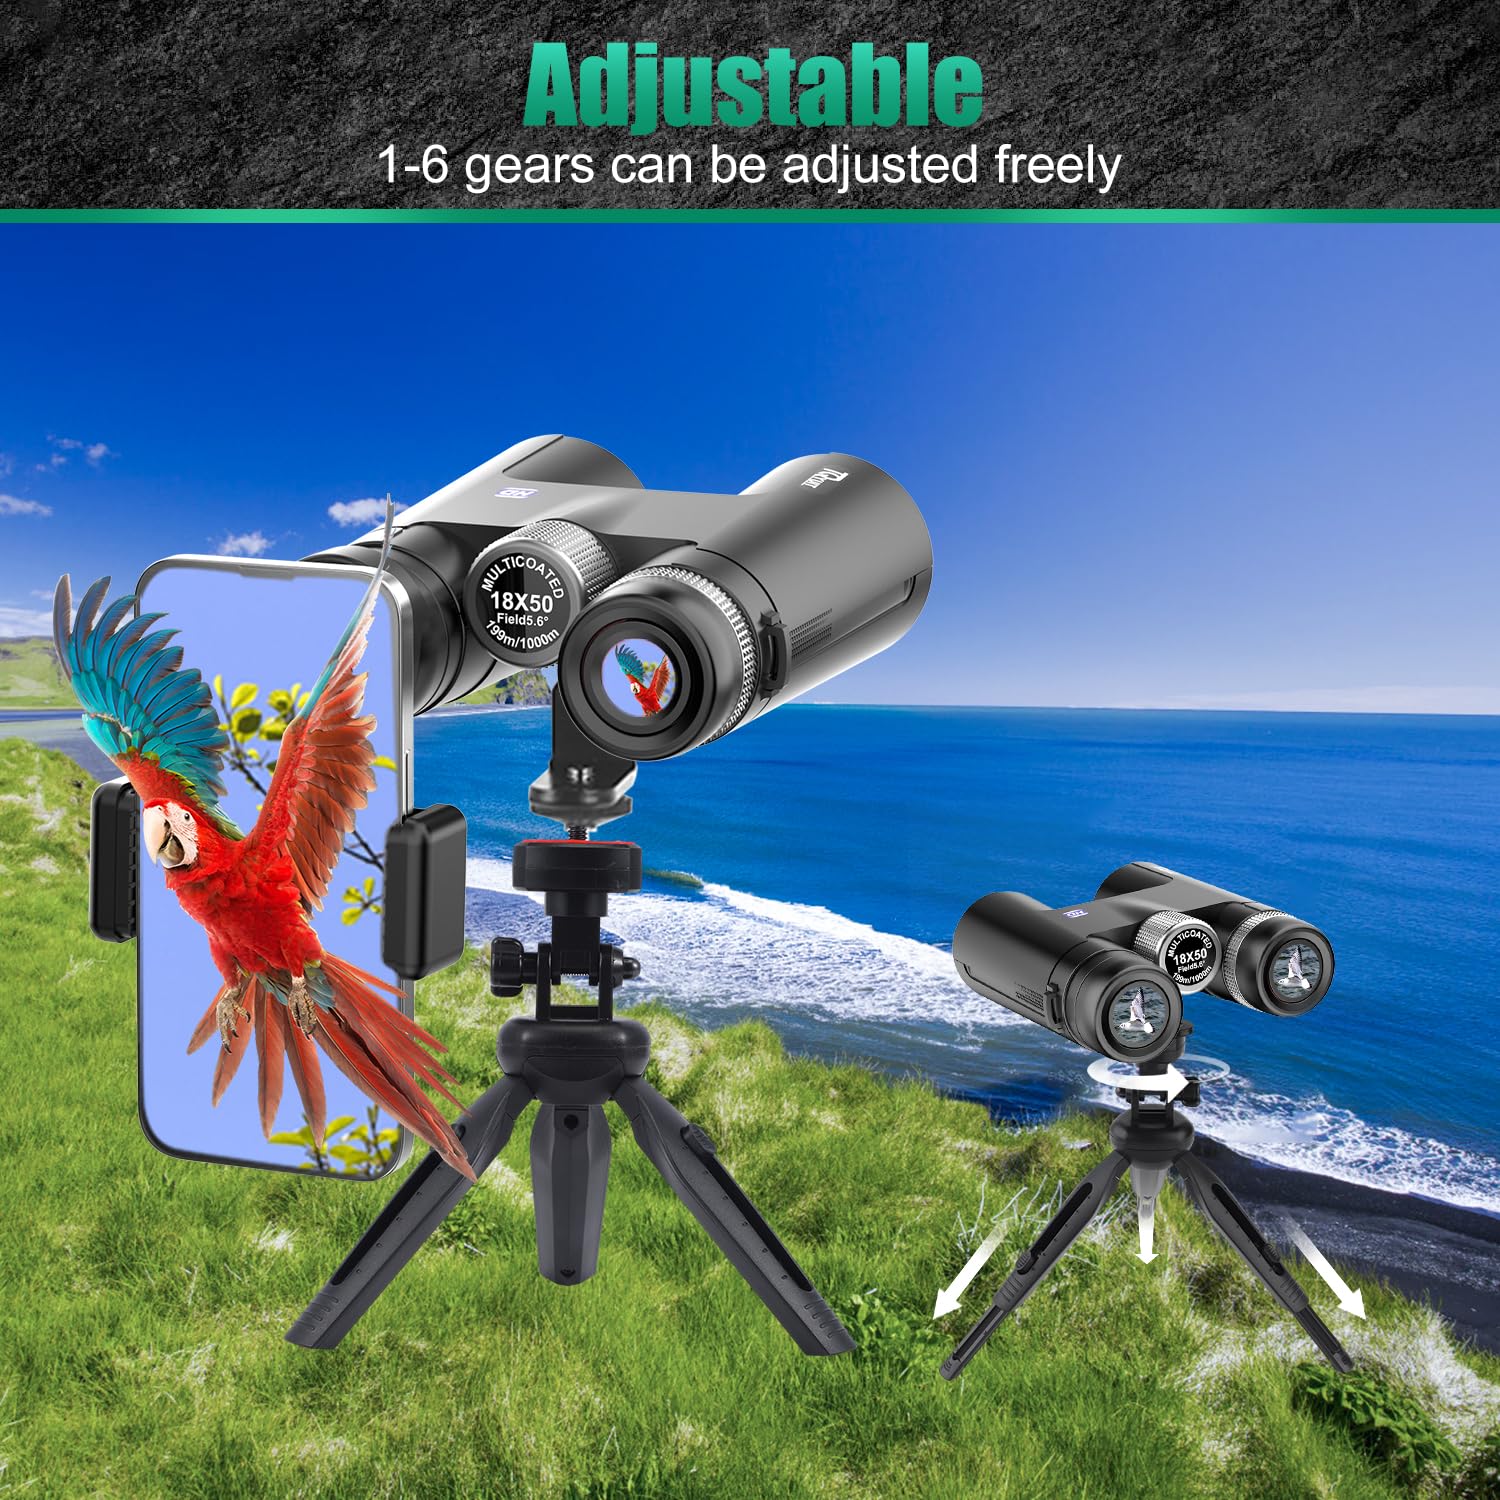 18x50 HD Binoculars for Adults with Upgraded Phone Adapter, Tripod and Tripod Adapter - Professional Waterproof Binoculars with BaK4 prisms and Large View for Bird Watching,Hunting,Travel